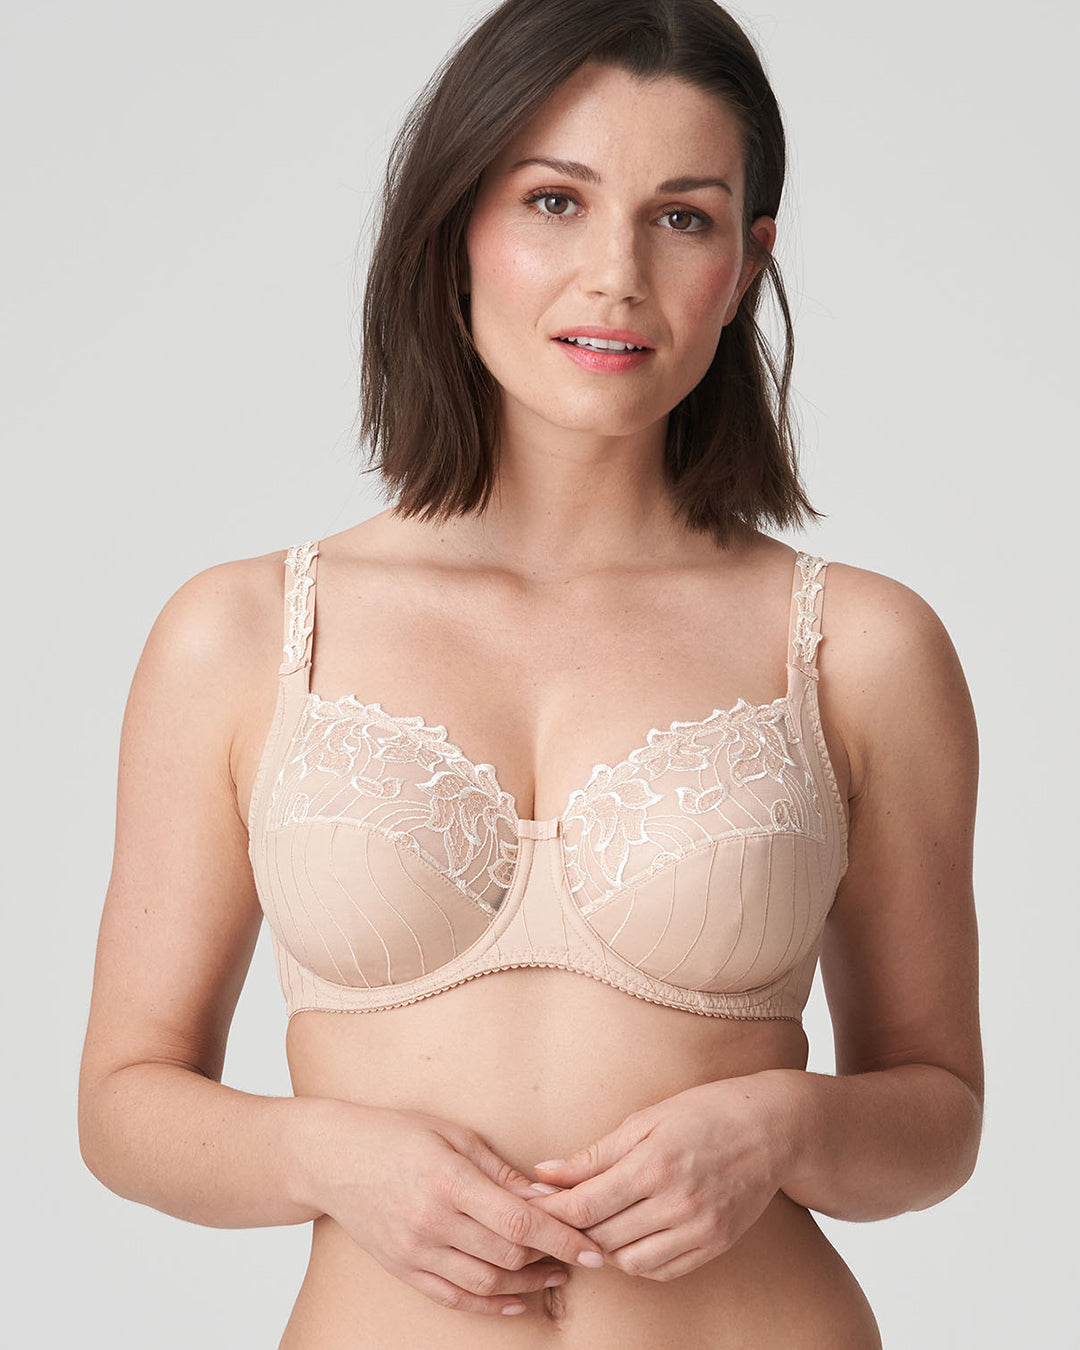 32G PRIMA DONNA Symphony Full Cup Wire Bra 70G 85G New (like Deauville)  BNWT £44.95 - PicClick UK